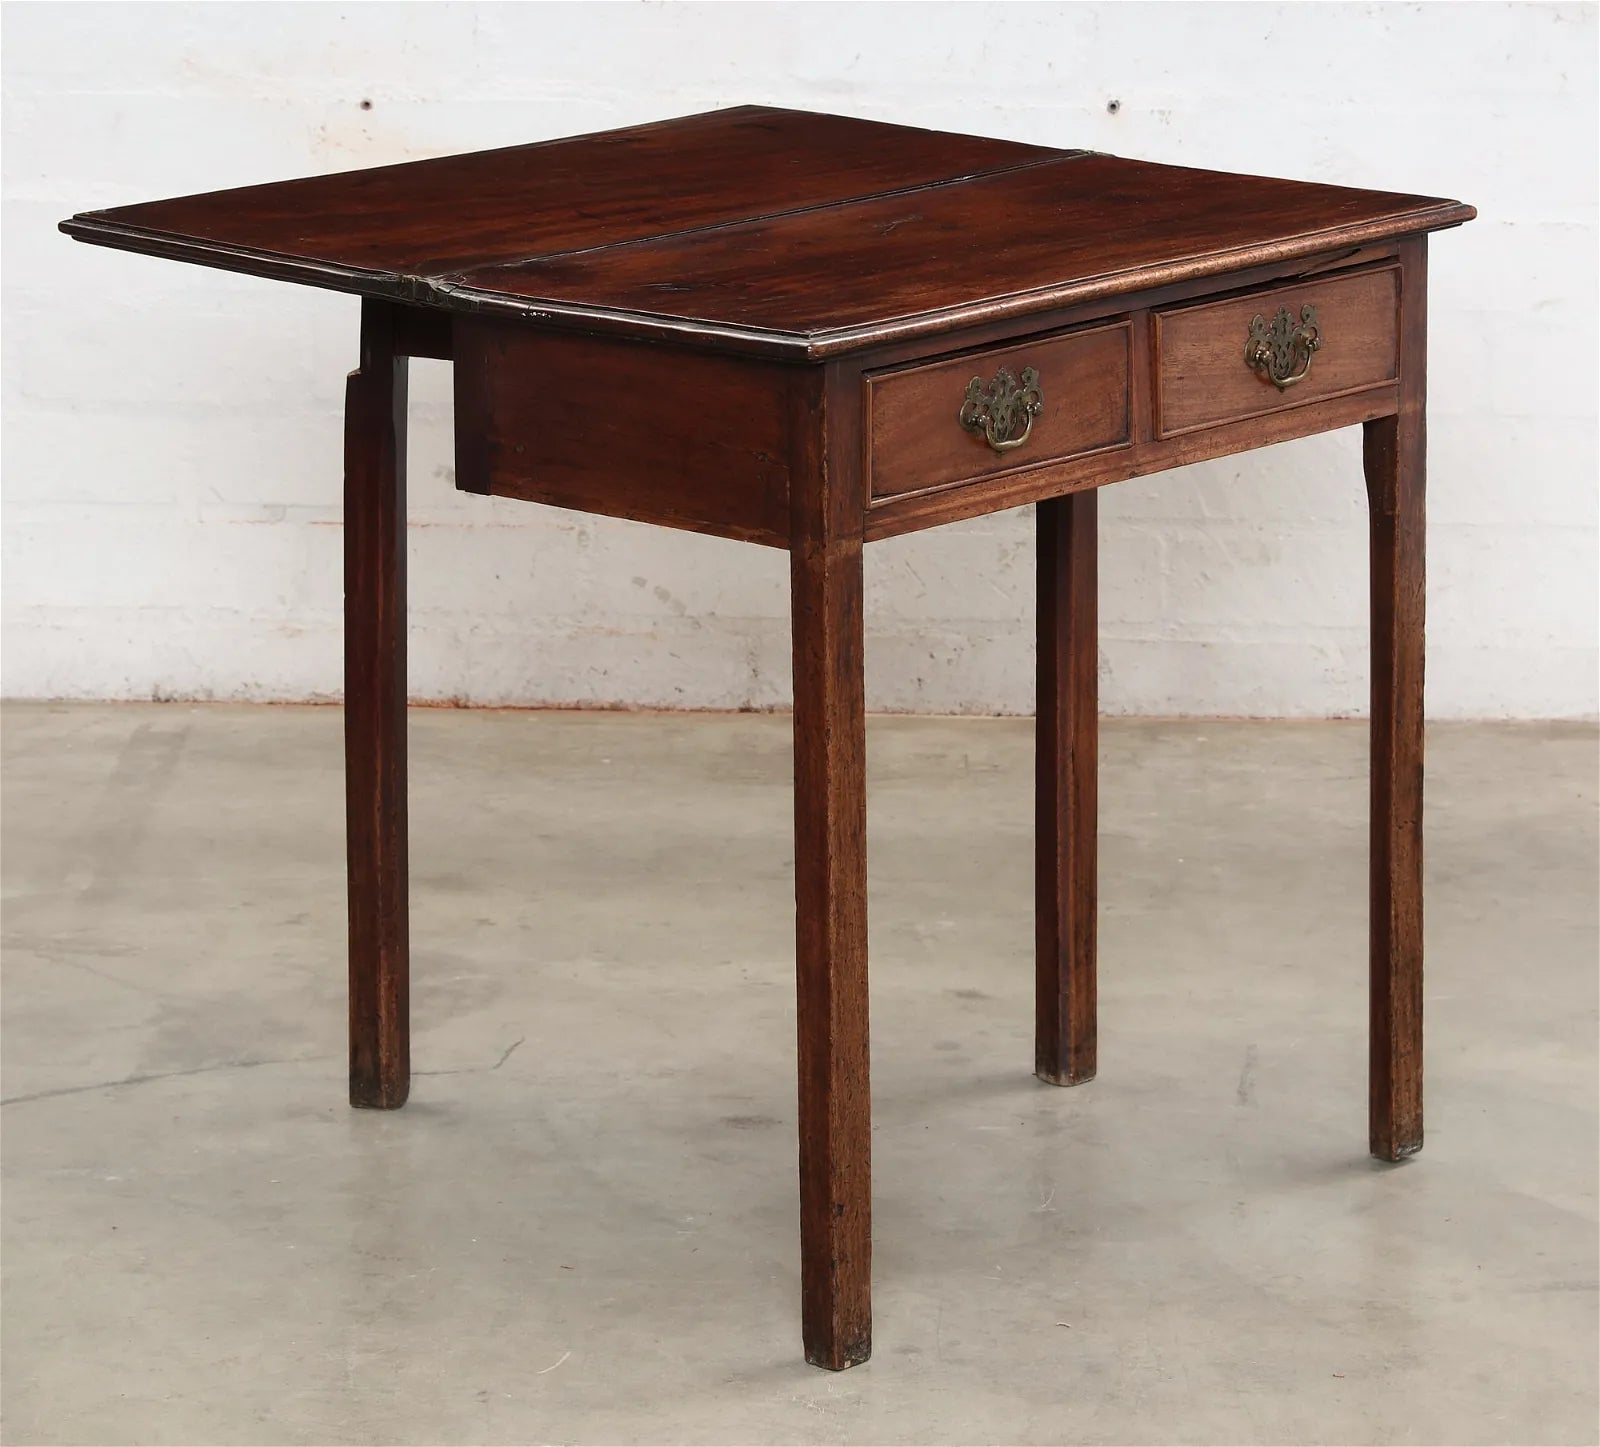 AF1-016: Late 18th C Period Antique English George III Mahogany Flip Top Card Table